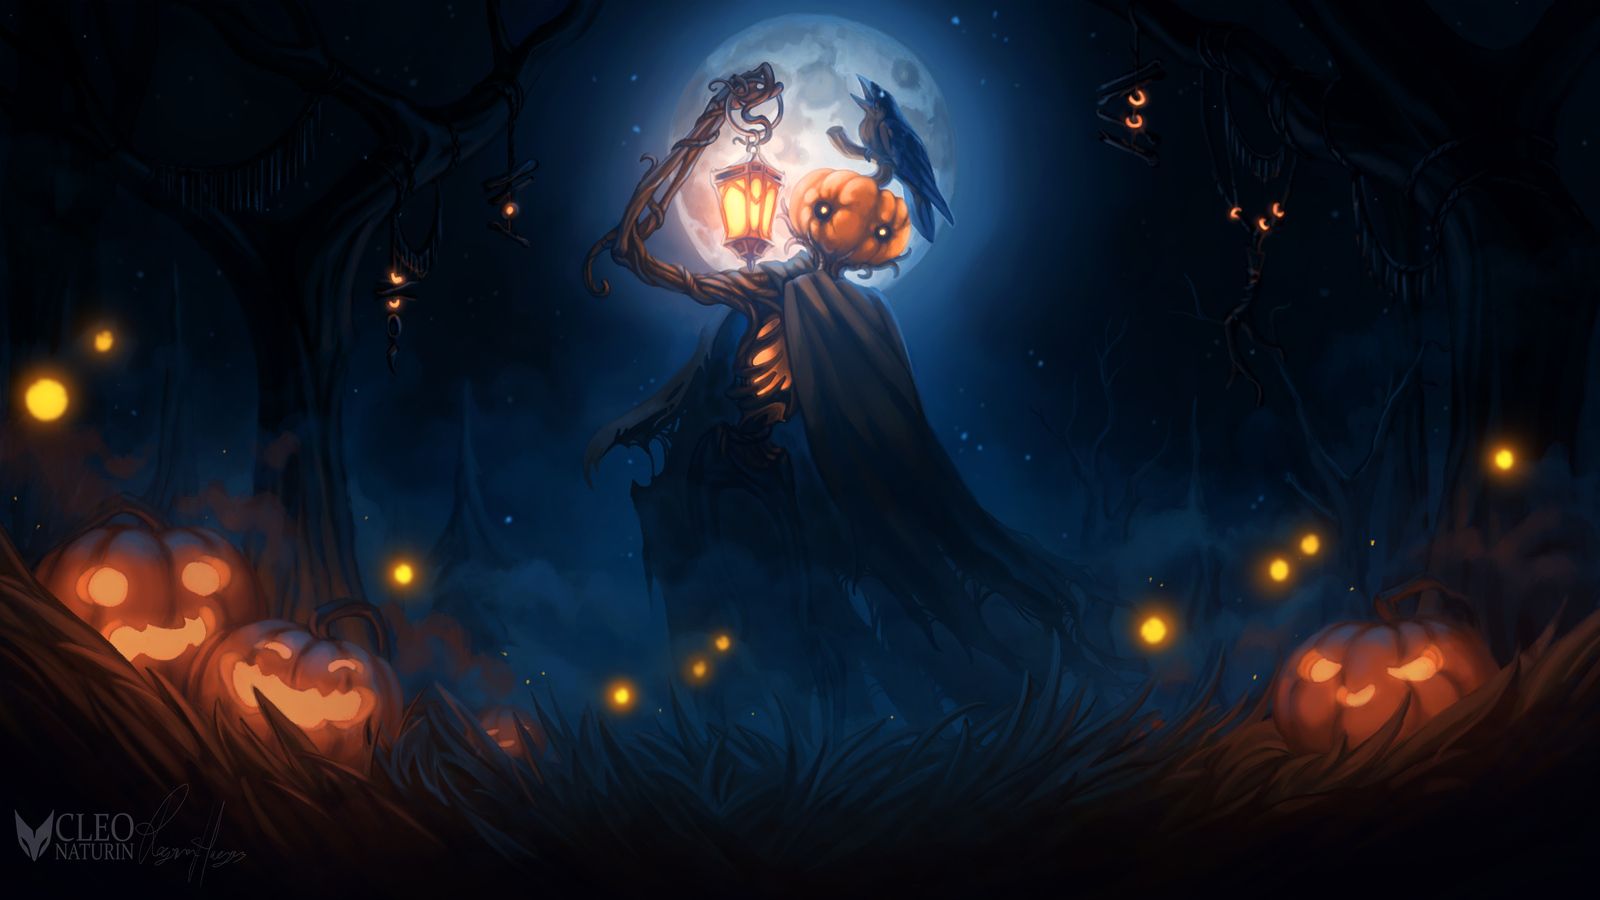 Halloween 2018 Digital Art 4k 1600x900 Resolution HD 4k Wallpaper, Image, Background, Photo and Picture